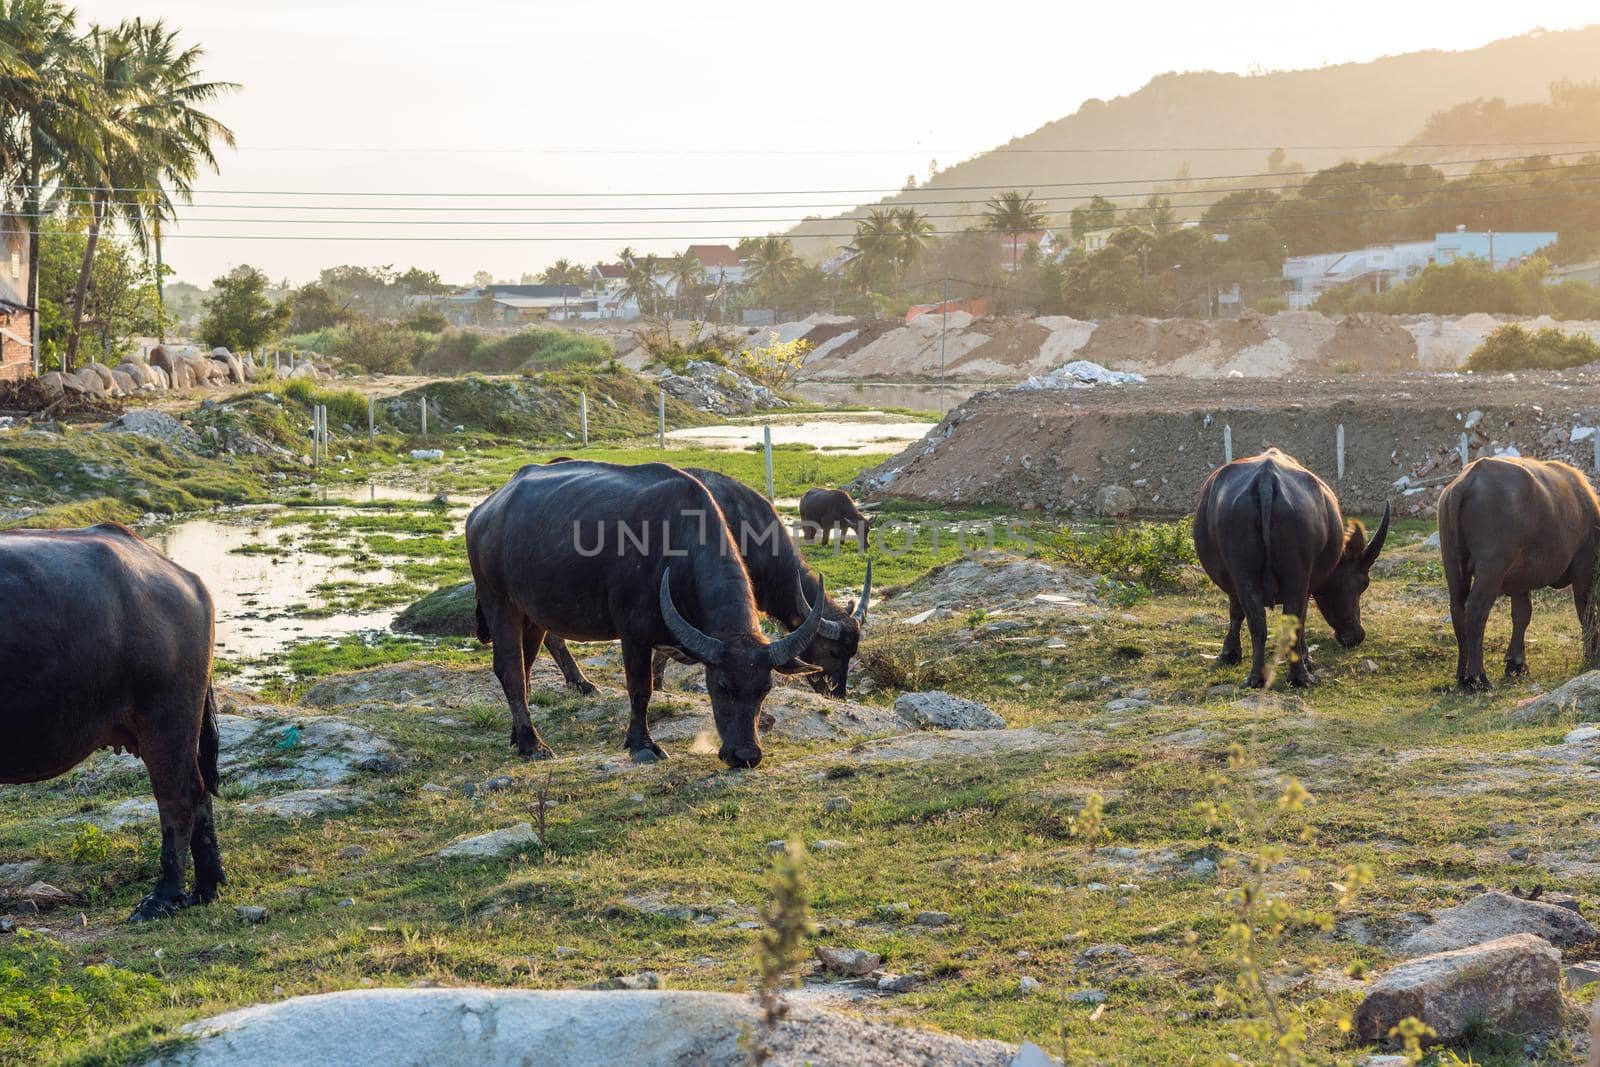 Buffaloes in the field in Vietnam, Nha Trang.